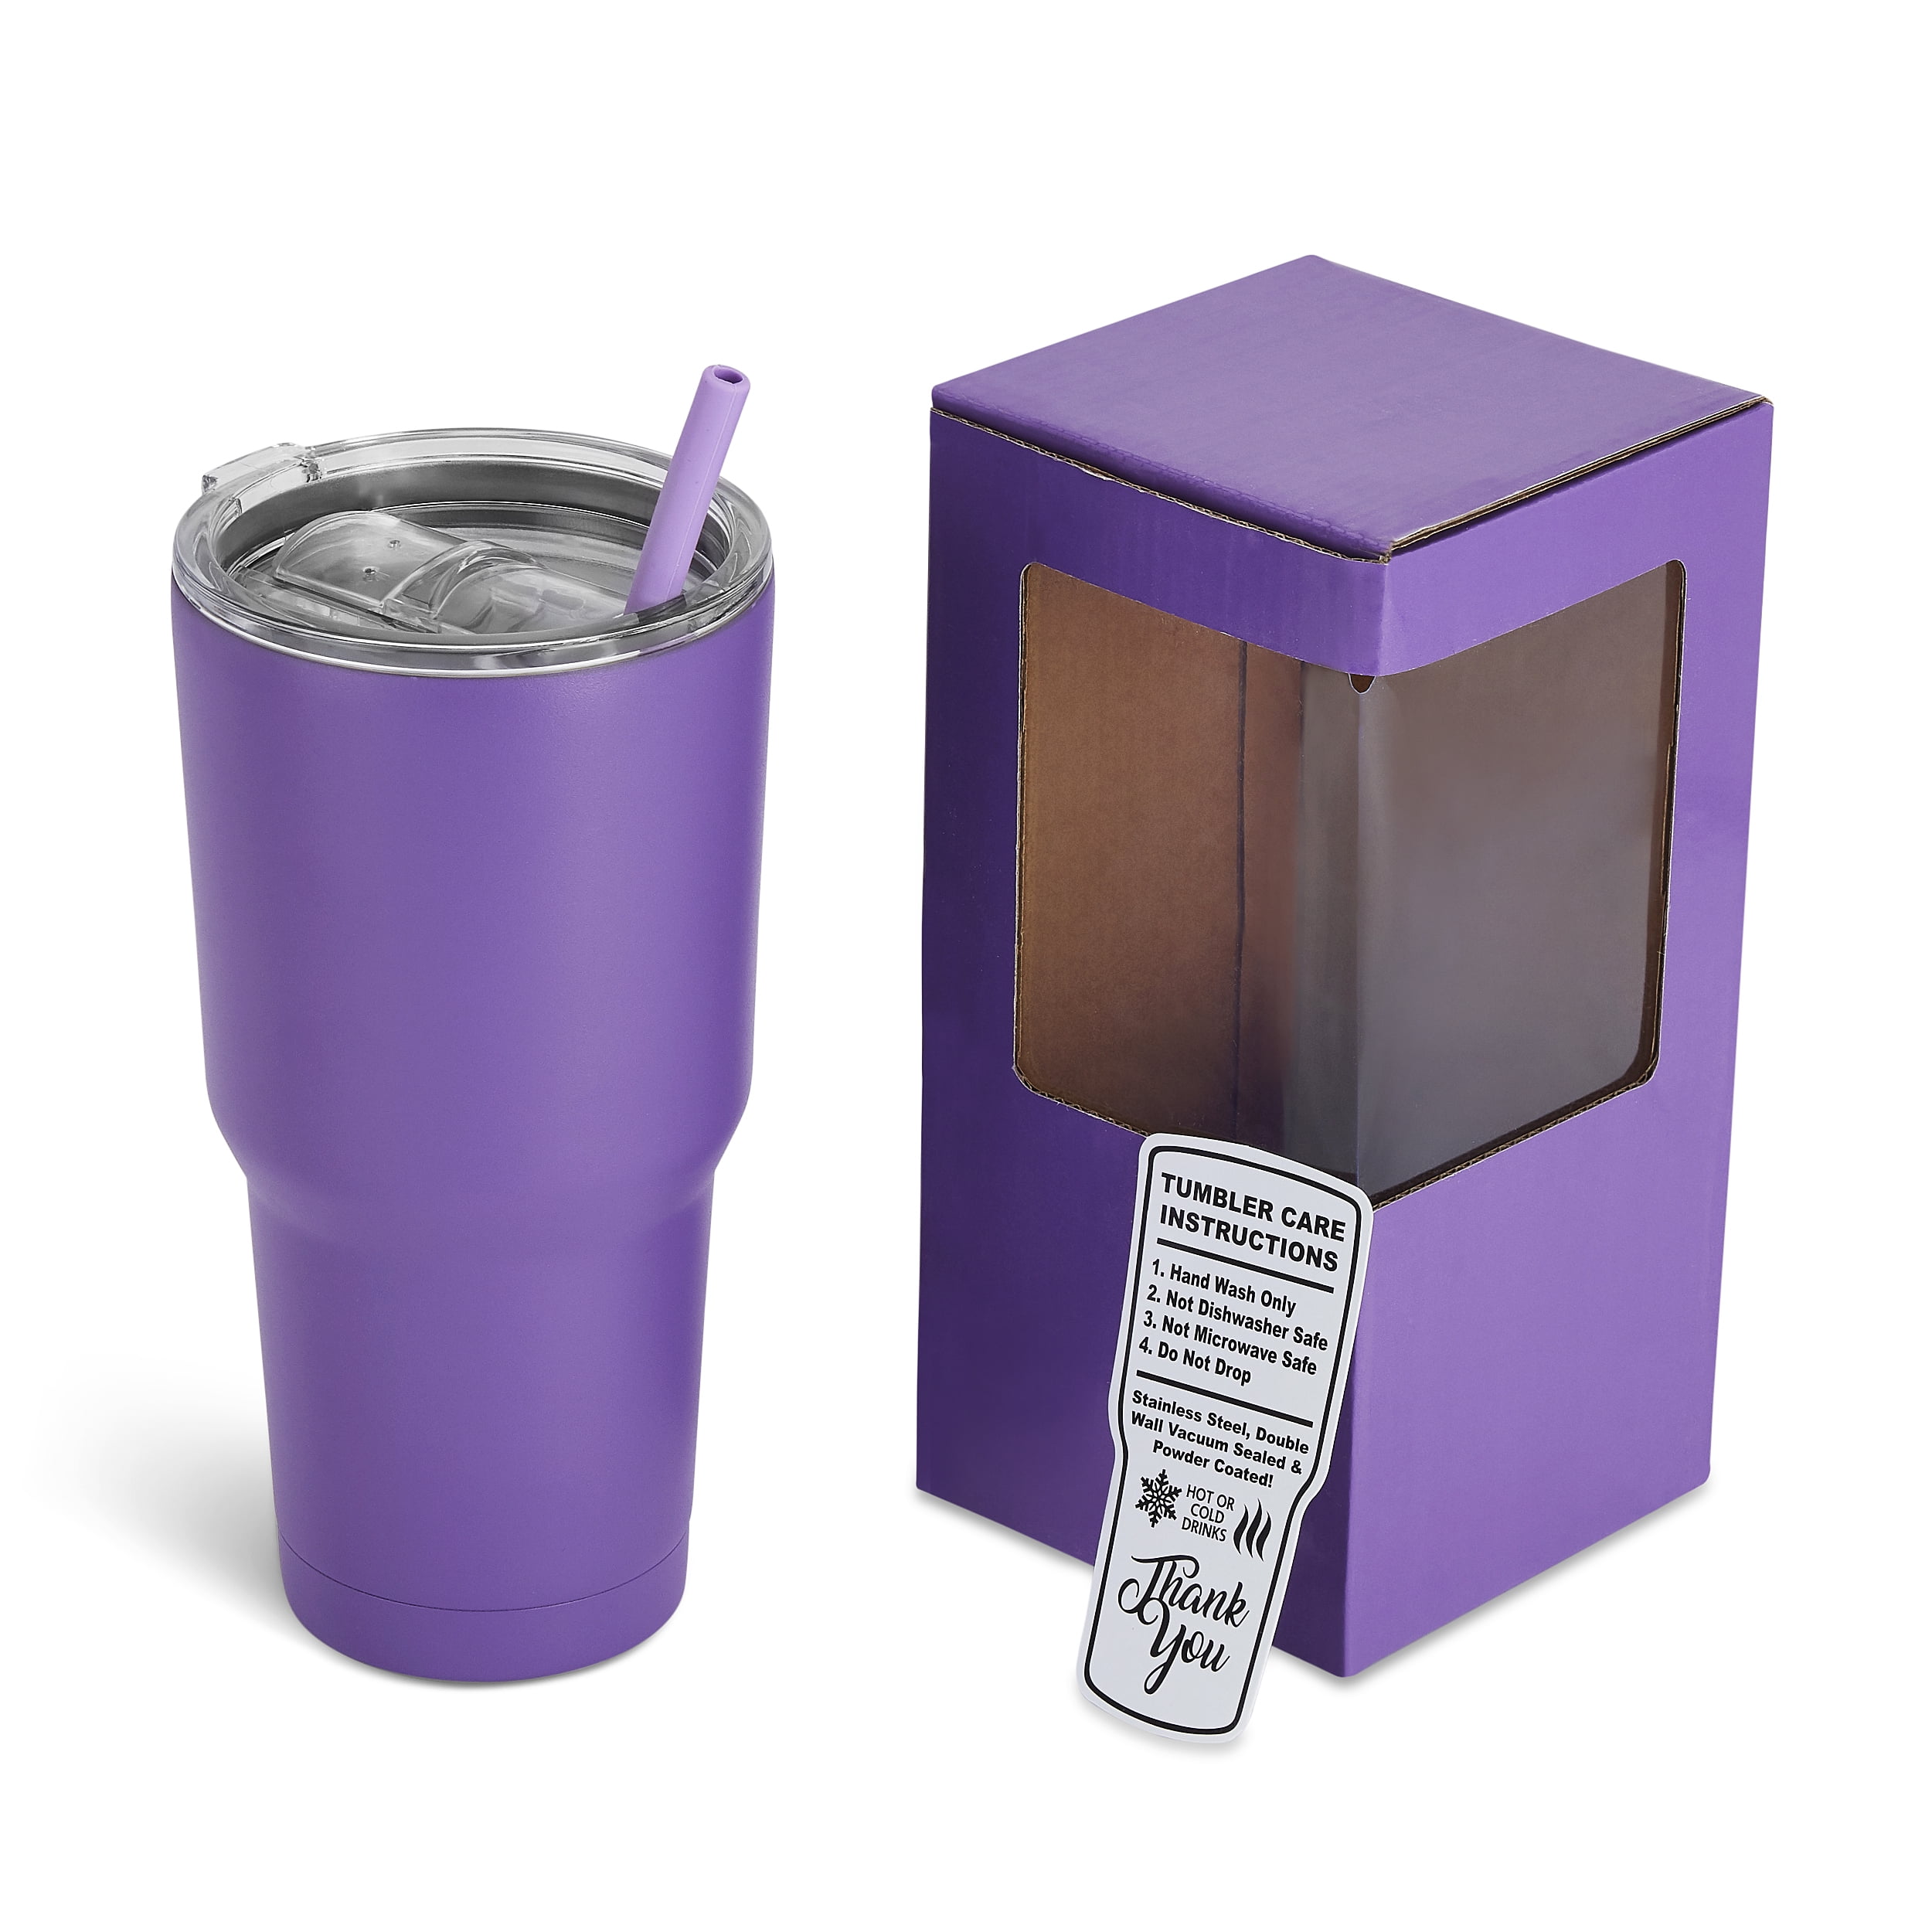 Lavender Stainless Steel 18oz Tumbler with Purple Jacket & Screw-on Lid